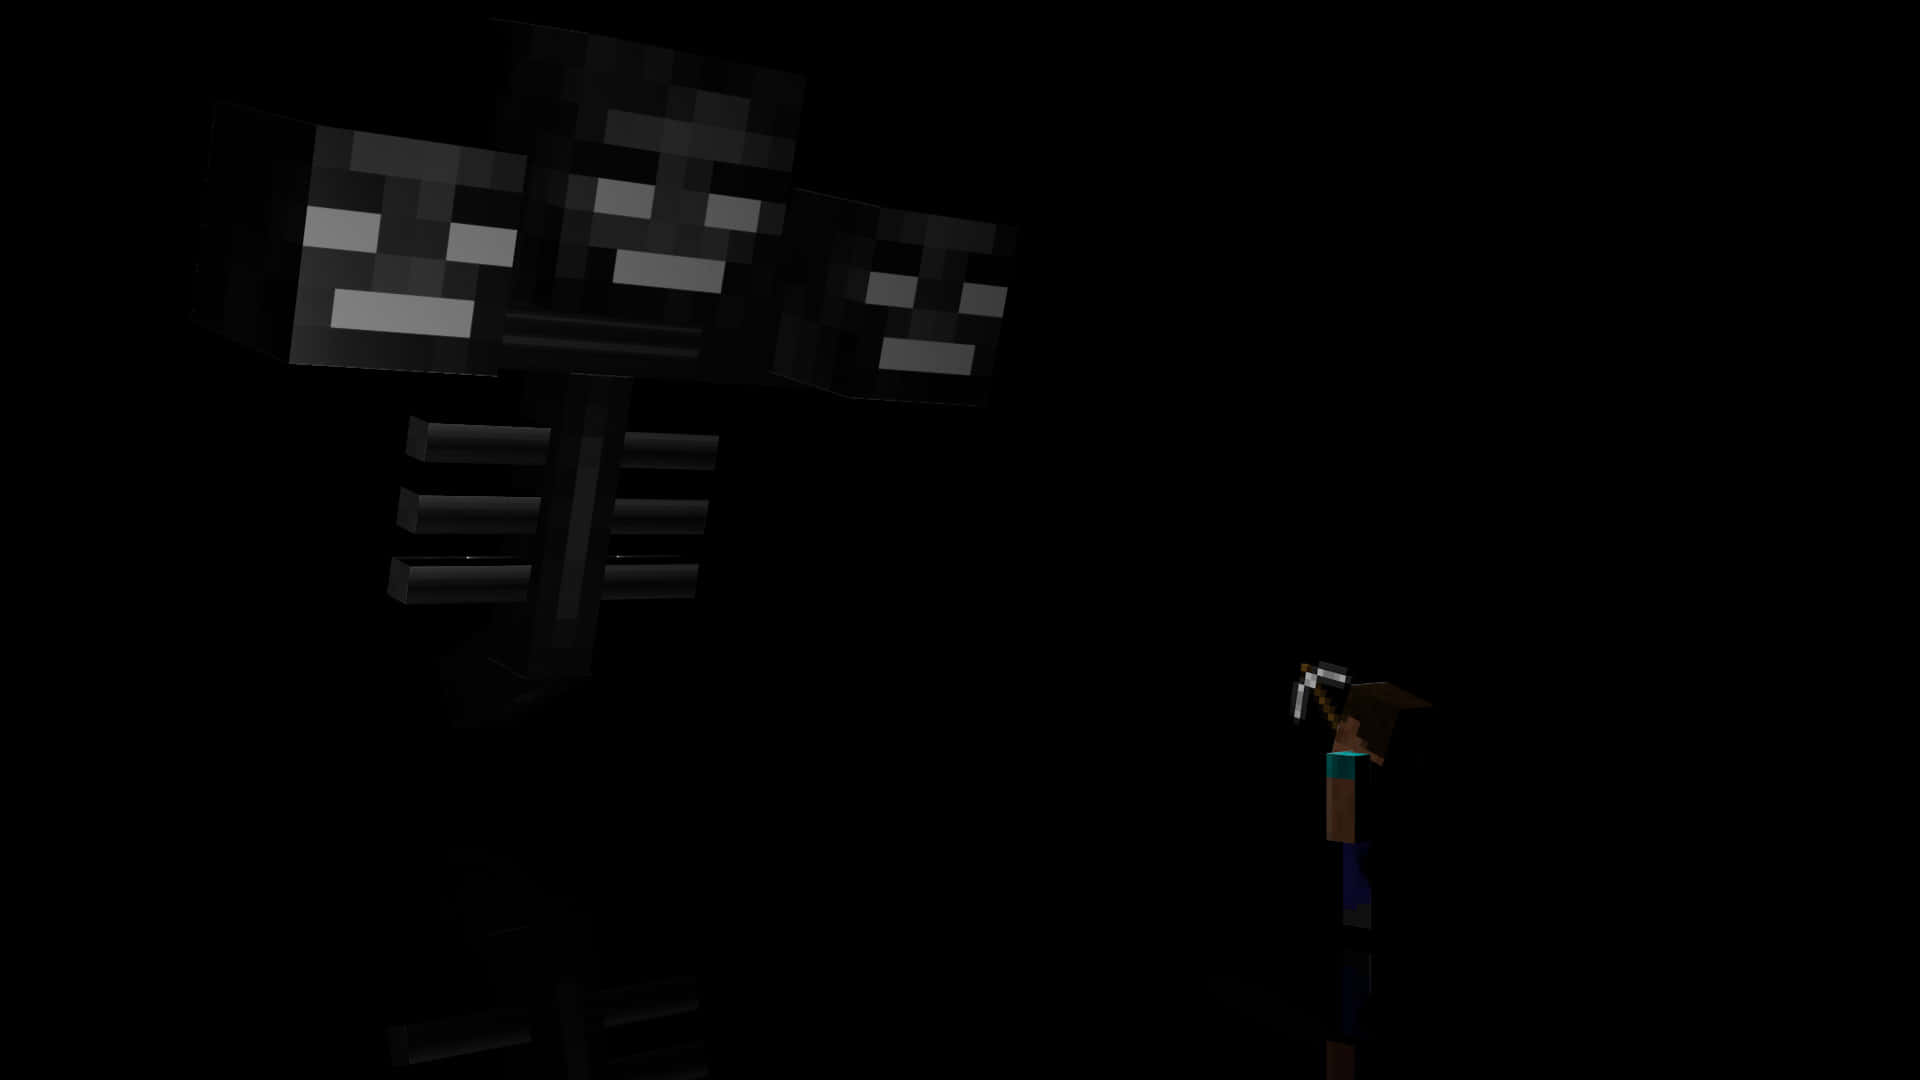 The Mighty Wither Boss in its Dark Lair in Minecraft Wallpaper